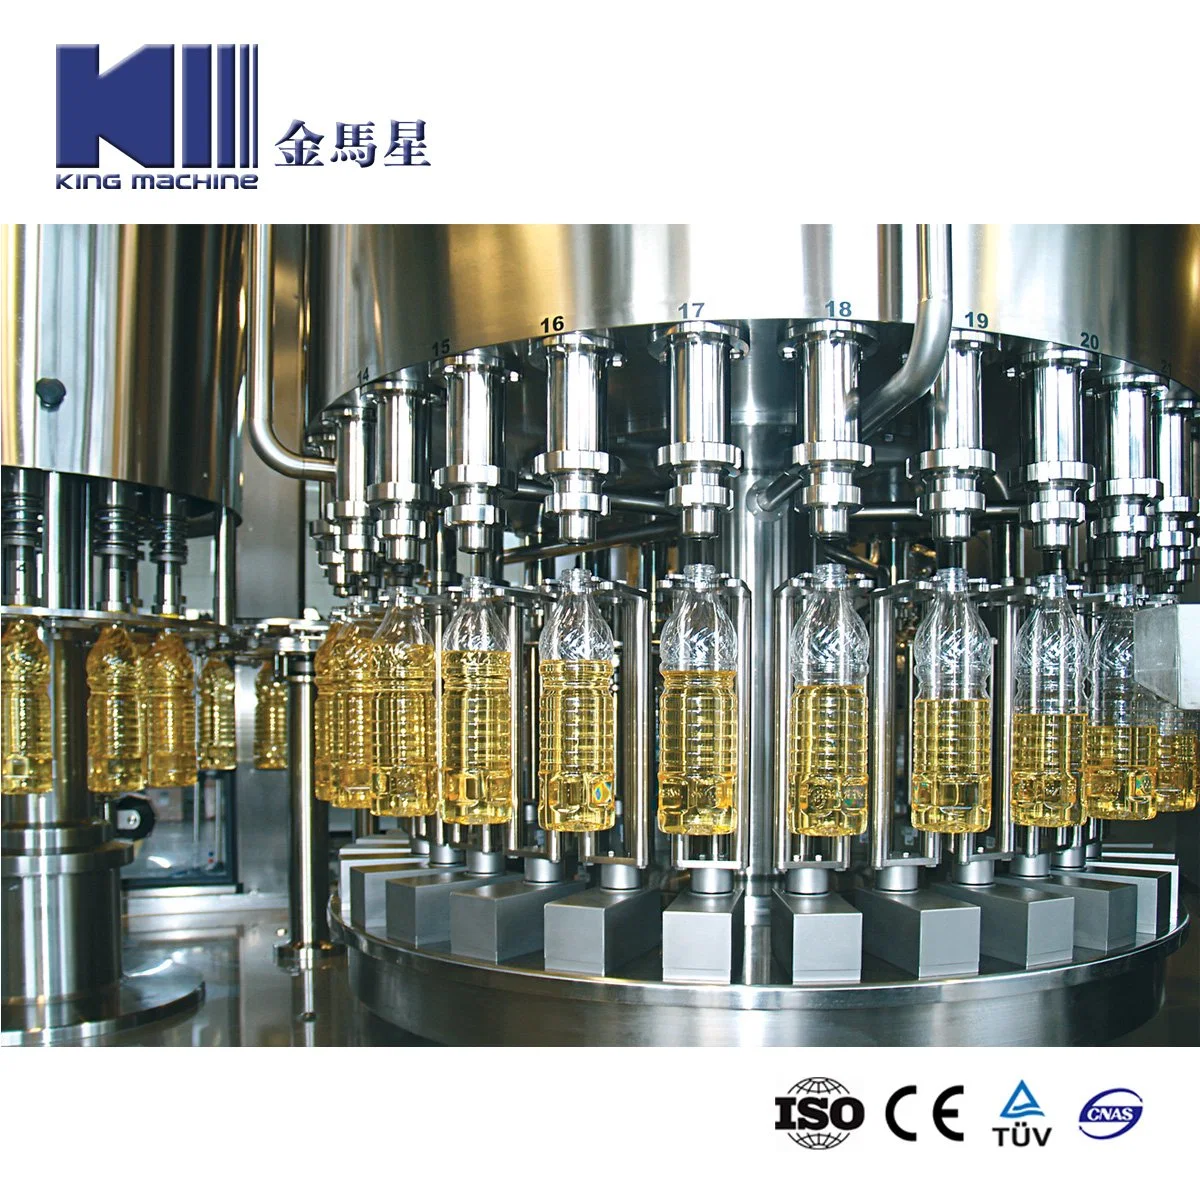 Complete Production Line of Oil Seals